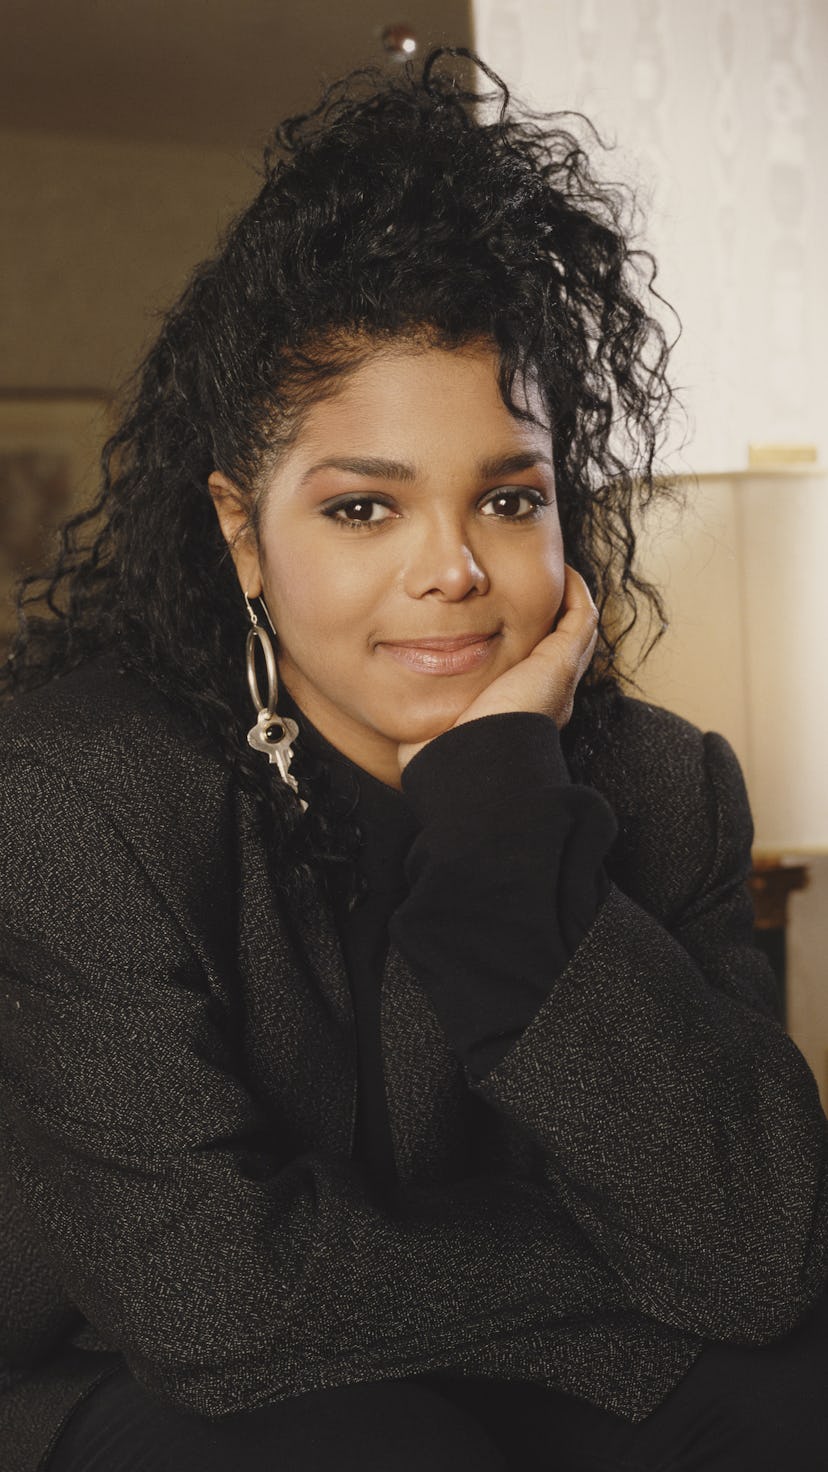 American singer Janet Jackson, circa 1990. (Photo by Tim Roney/Getty Images)